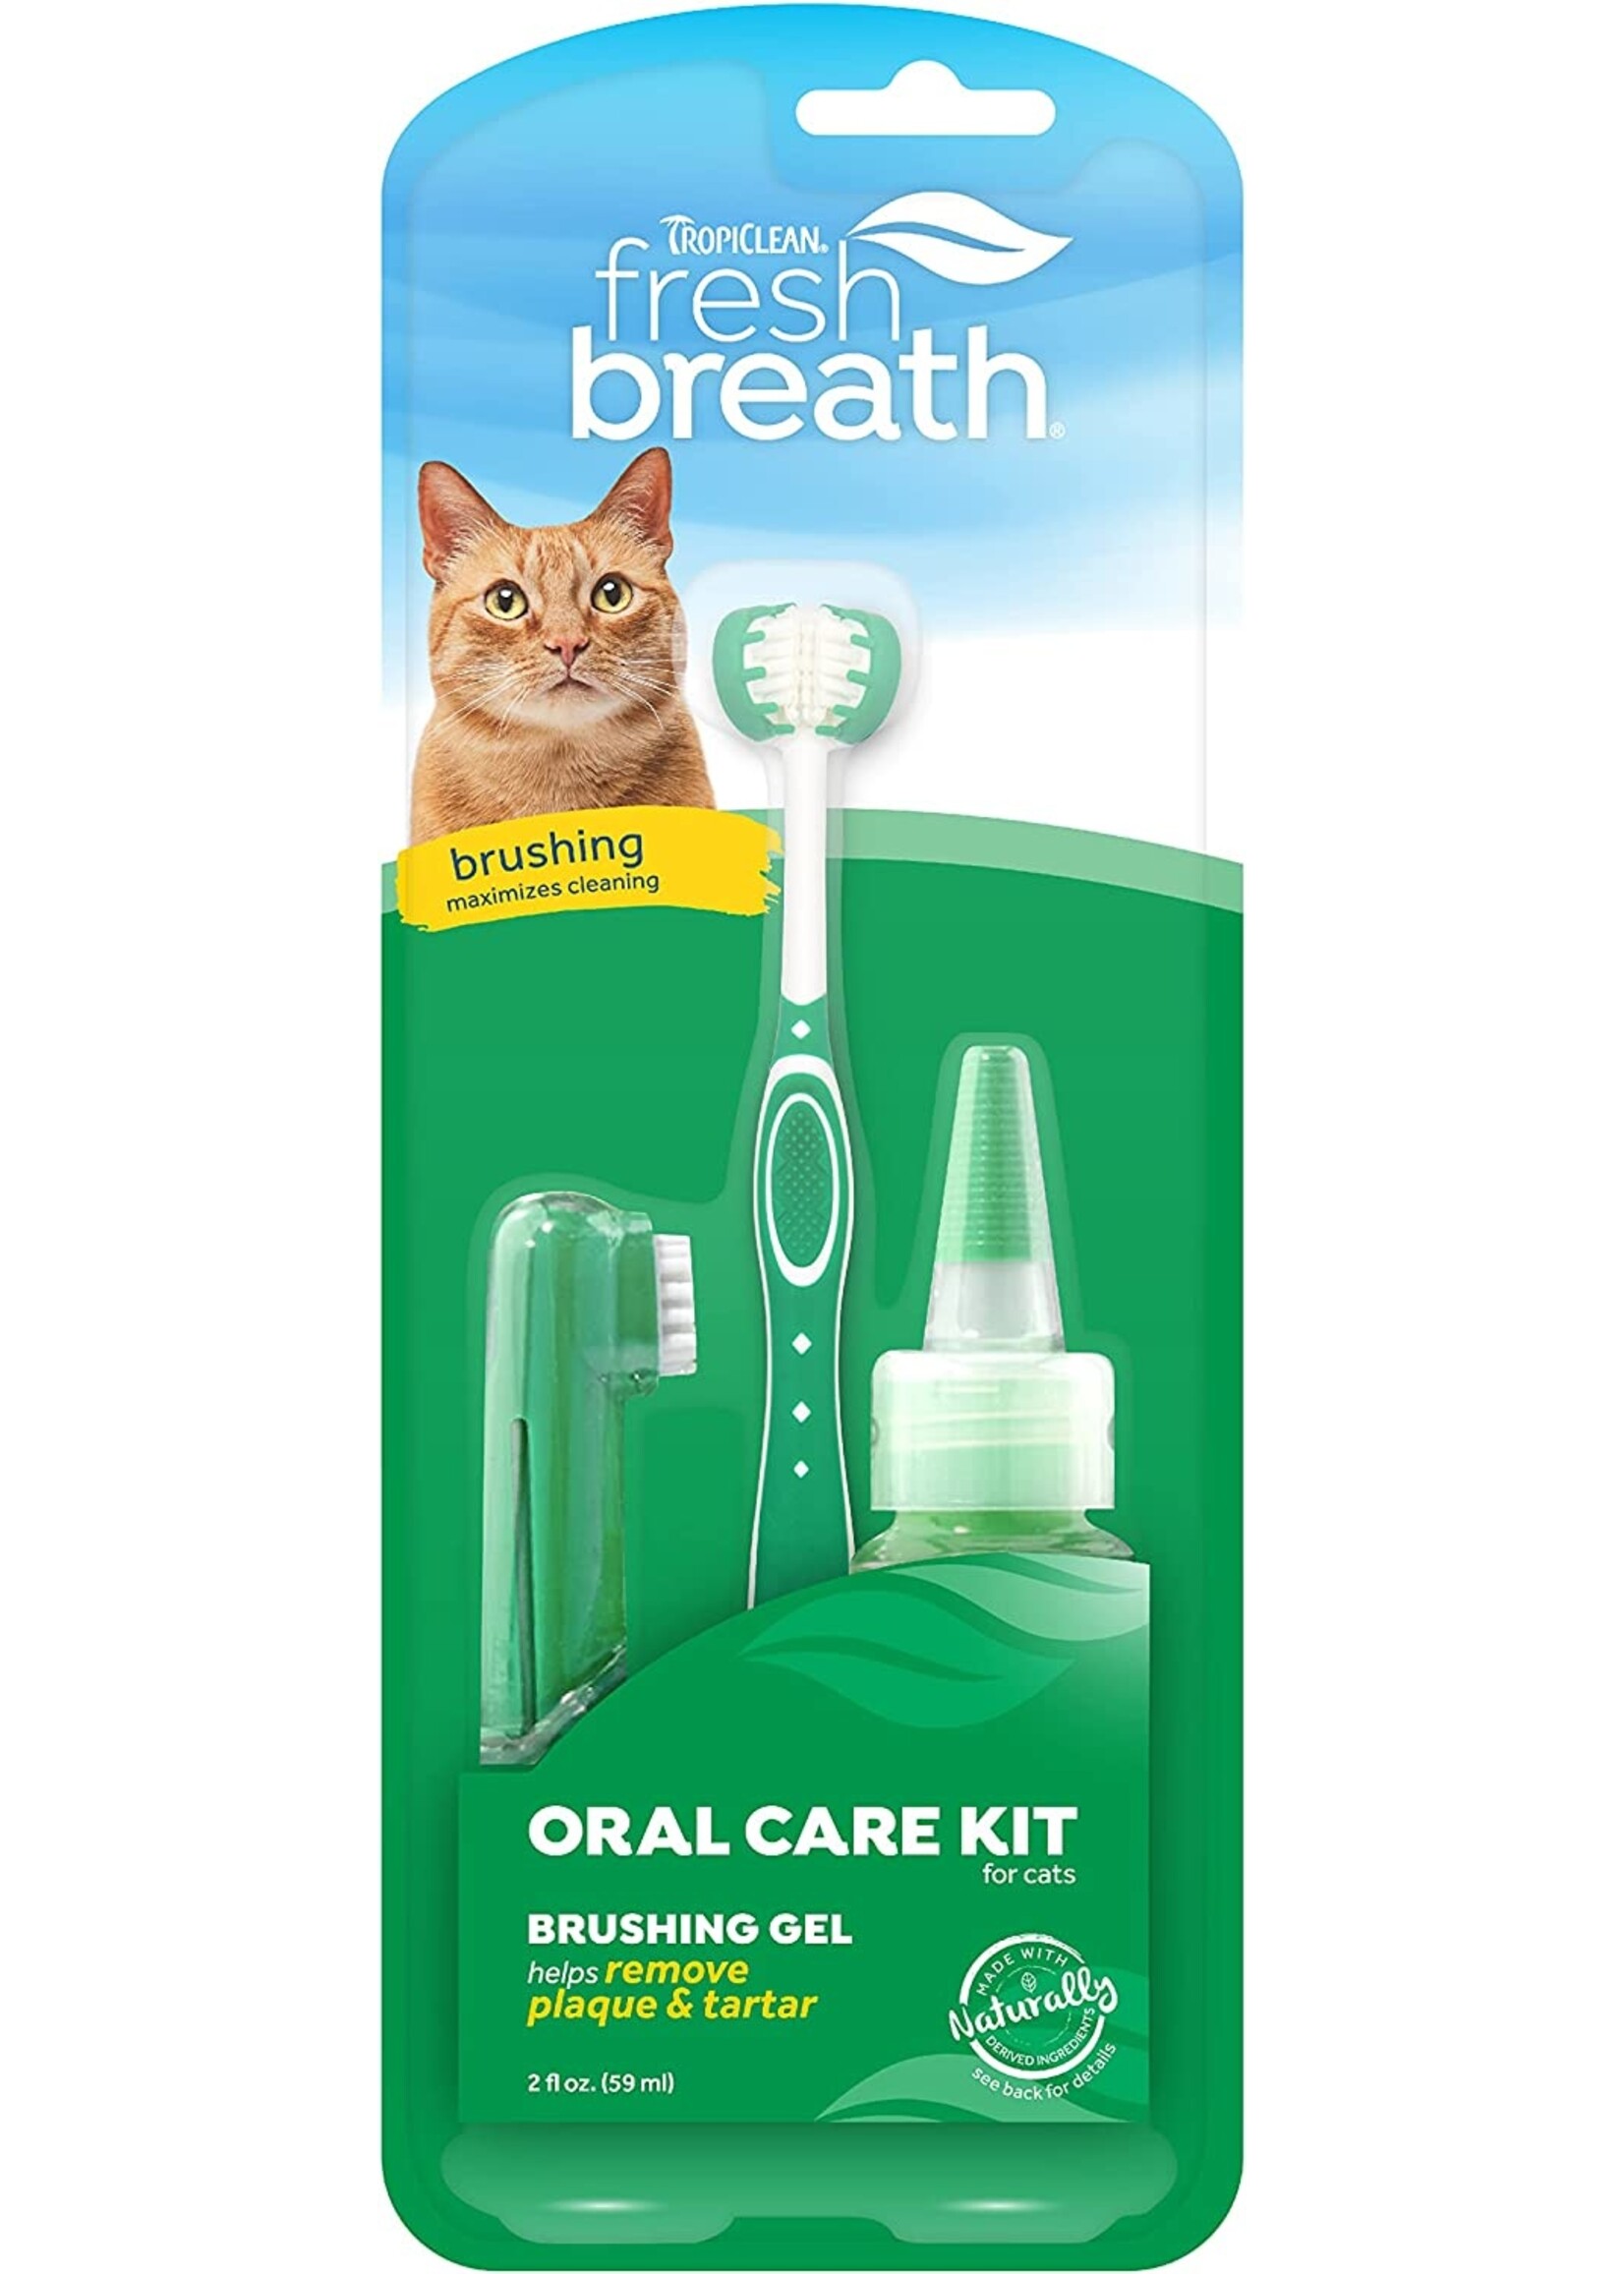 Tropiclean TropiClean Fresh Breath Oral Care Brushing Kit for Cats 2oz